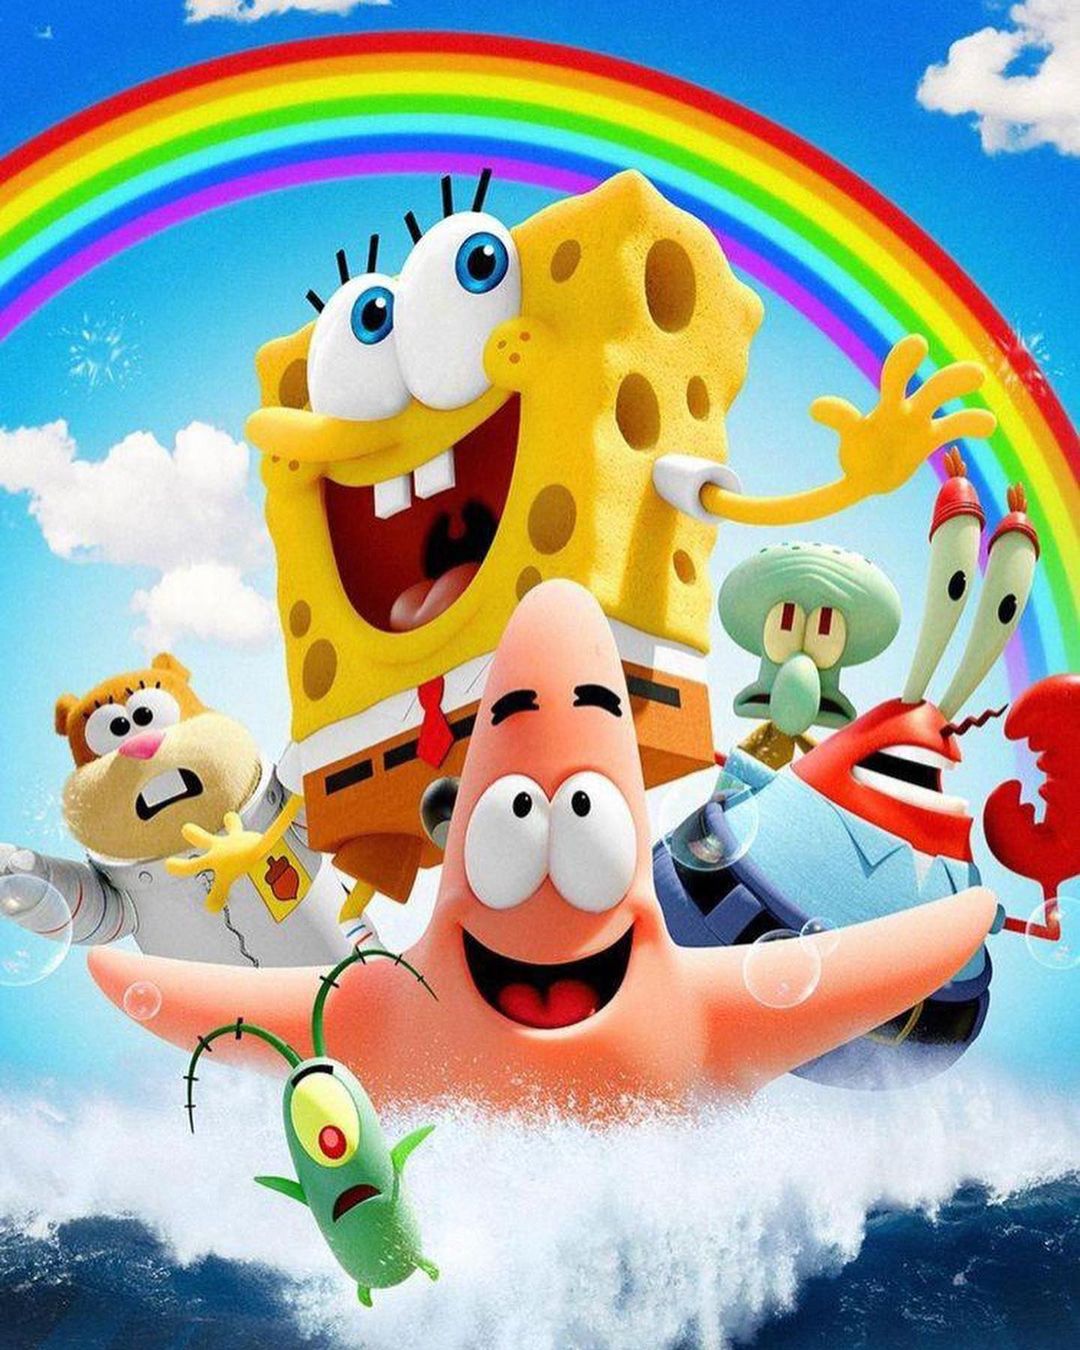 SpongeBob with Sandy, Squidward, Mr. Krabs, Patrick and Plankton coming out of the sea with a rainbow in the background